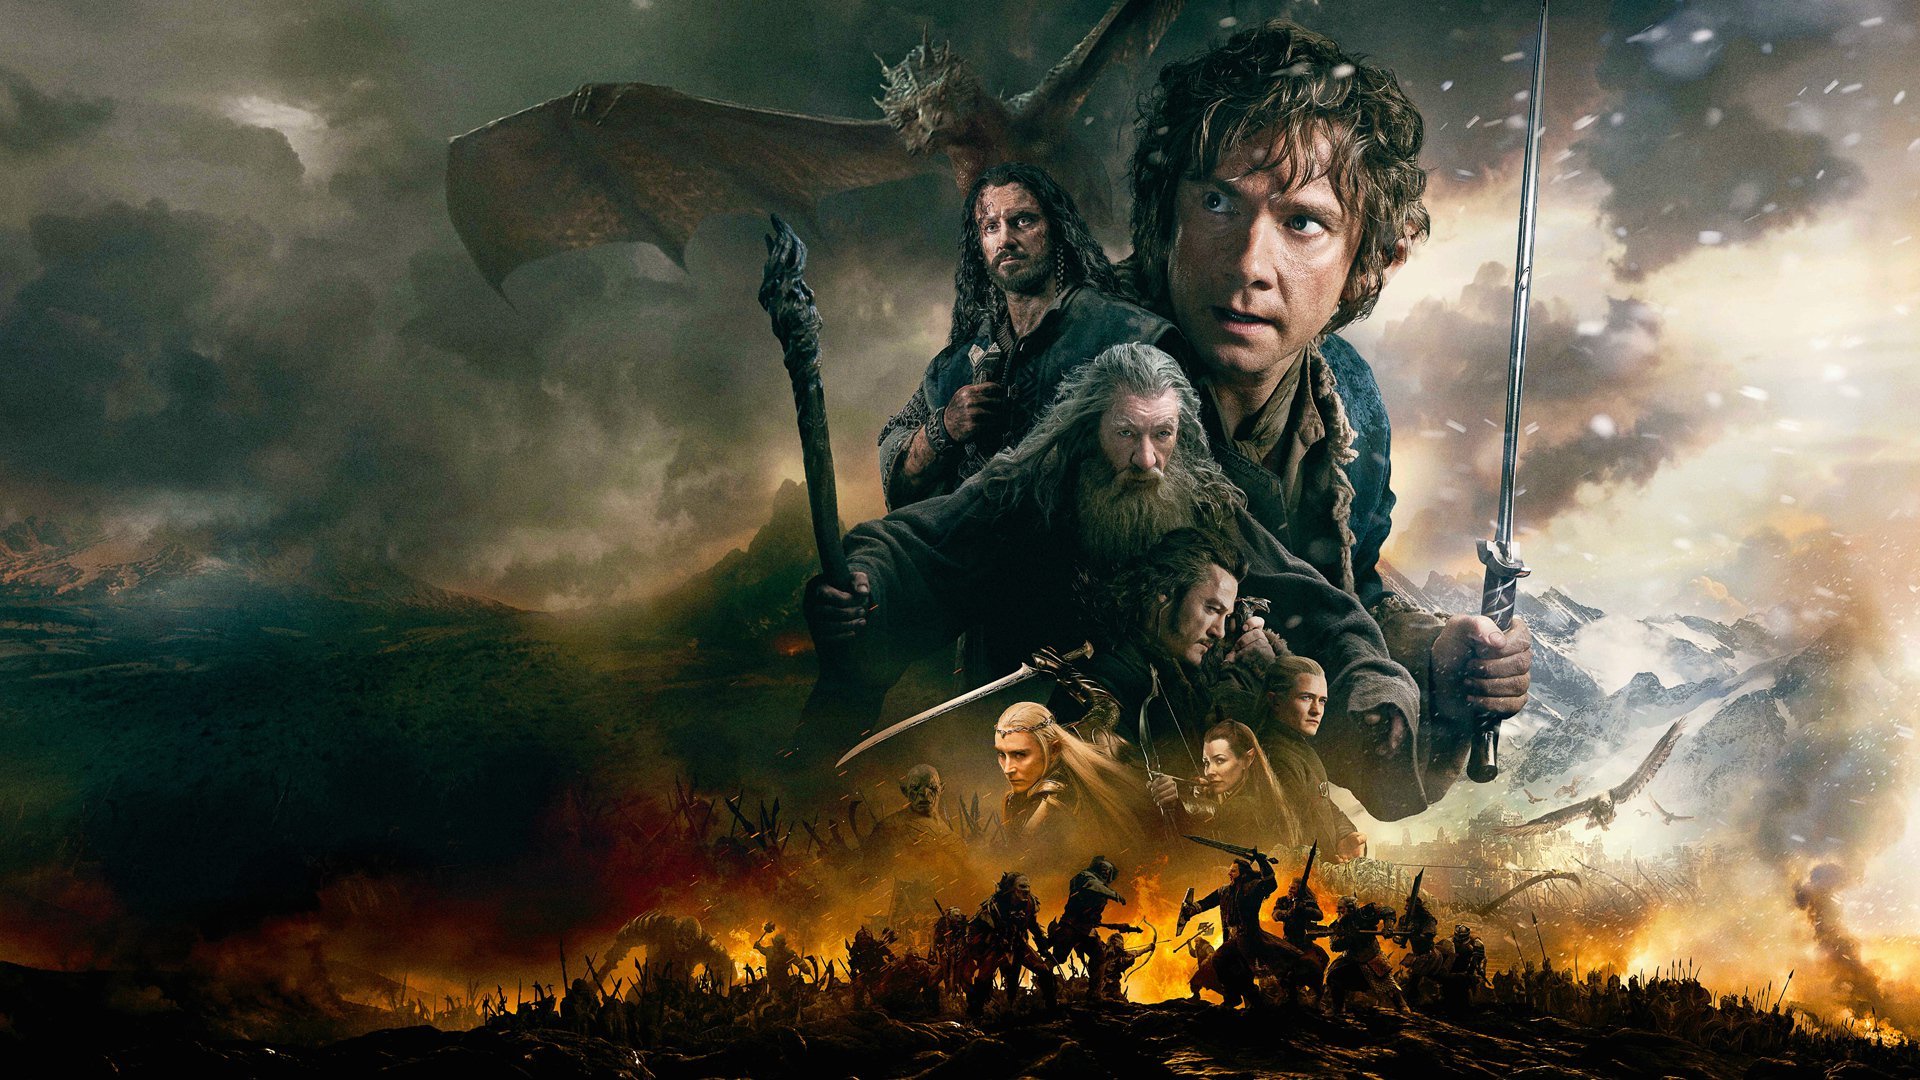 Download full hd 1920x1080 The Hobbit: The Battle Of The Five Armies desktop background ID:100635 for free